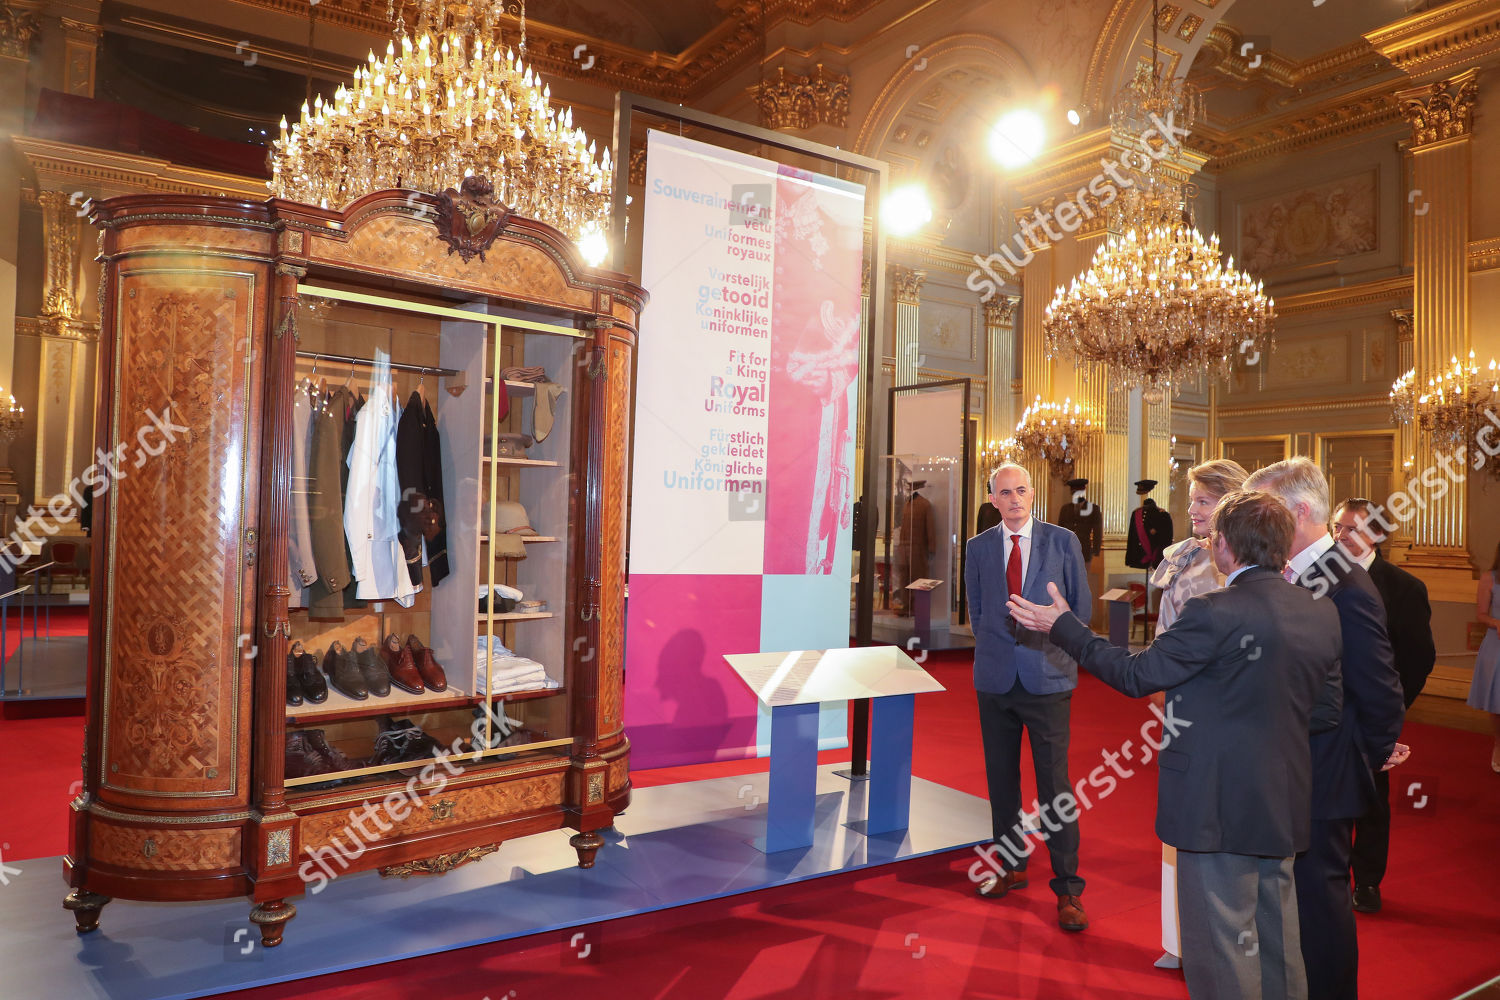 belgian-royals-summer-expo-at-the-royal-palace-brussels-belgium-shutterstock-editorial-10340779o.jpg